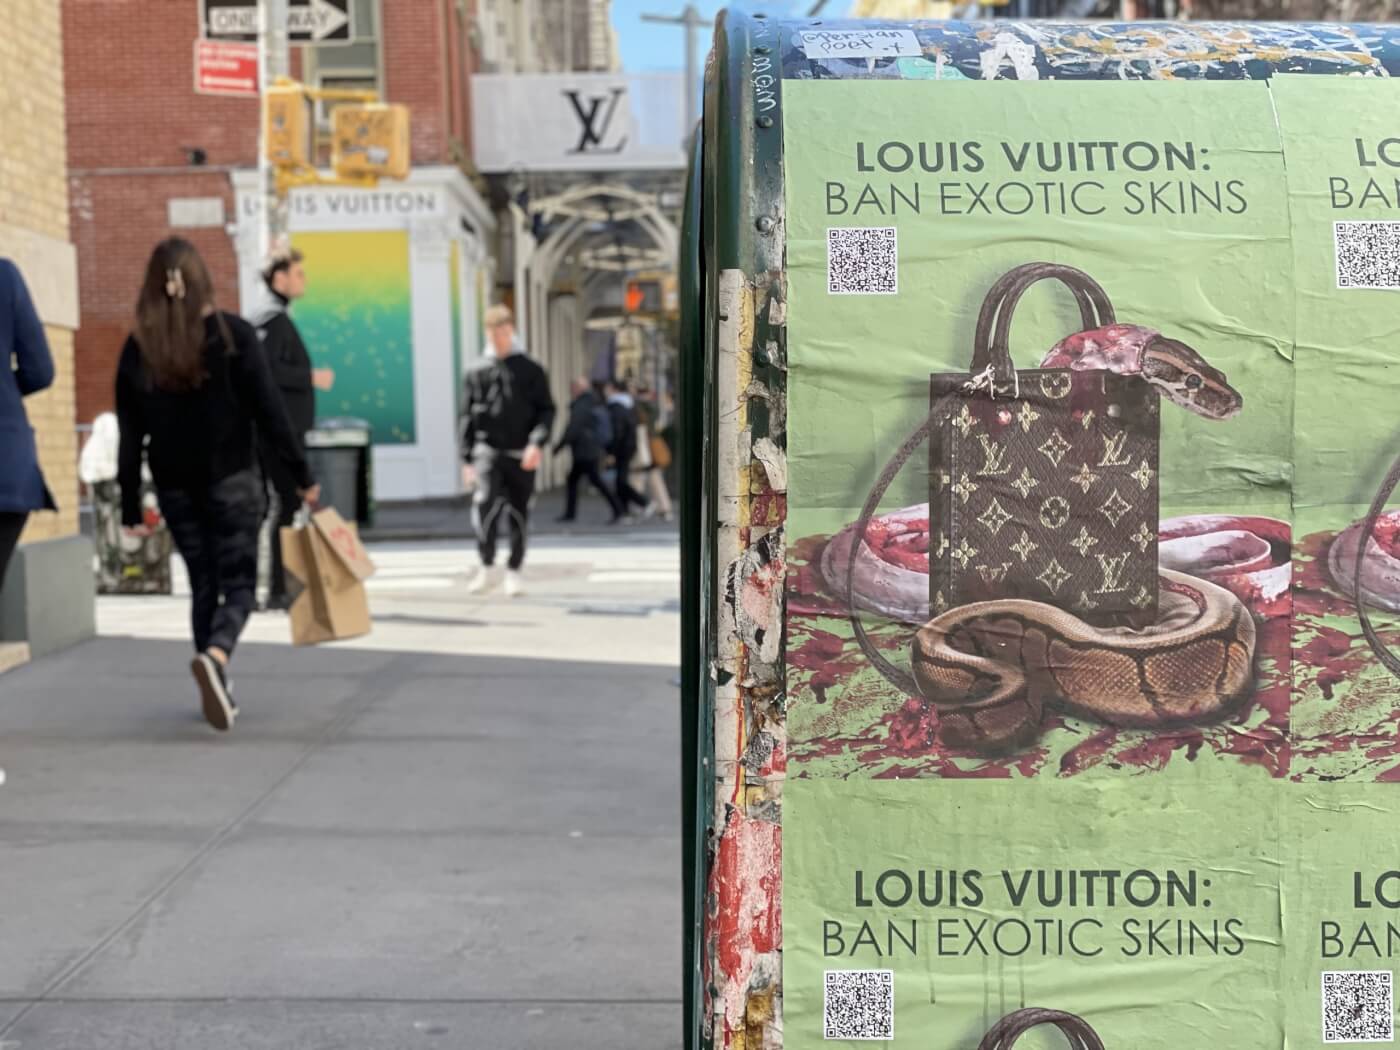 Respecting Views: LVMH Says Its Sustainability Plan Won't Eliminate Exotic  Animal Skin Use But Improve Practices - The Scene